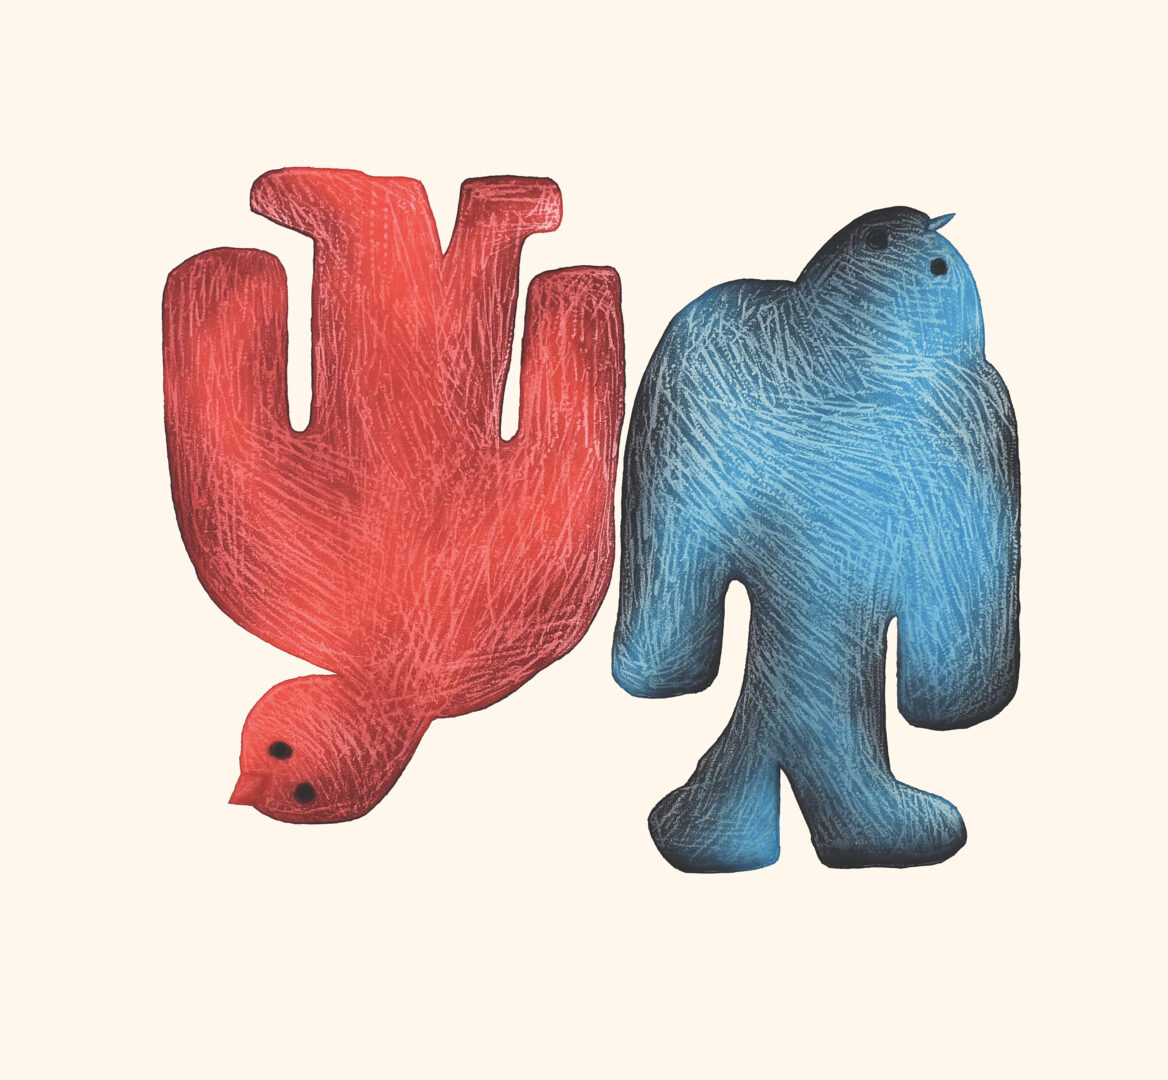 One original Etching & Aquatint by Inuit artist, Saimaiyu Akesuk. One print of two birds, in red and blue.